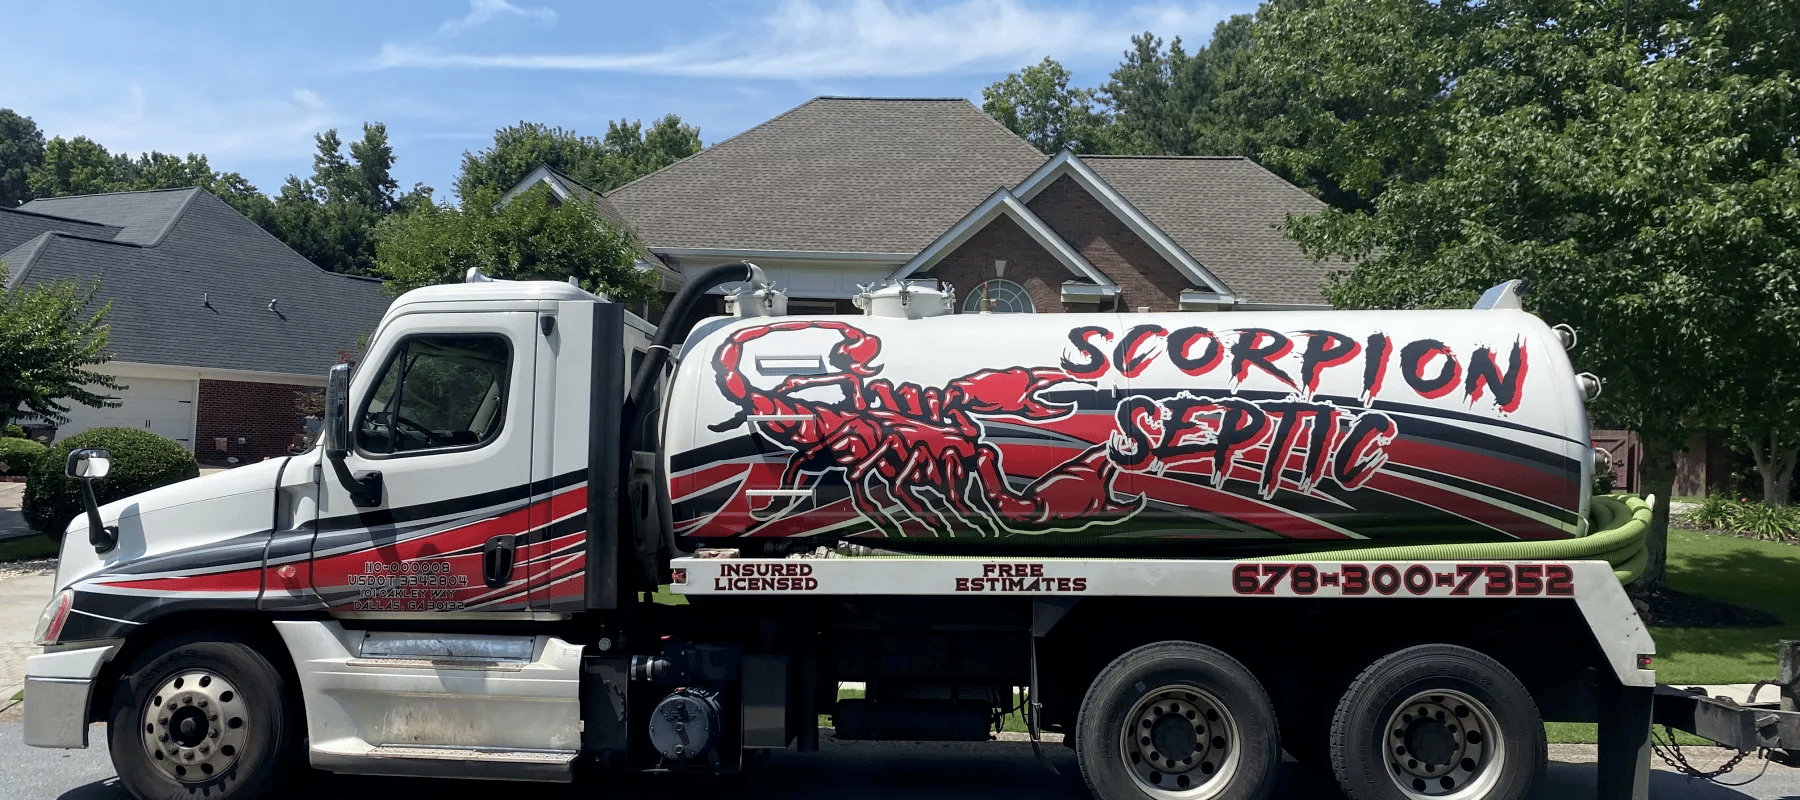 Scorpion Septic: Your Local Provider of Septic System Design and Installation for Pet Stores and Animal Groomers in Dallas, GA